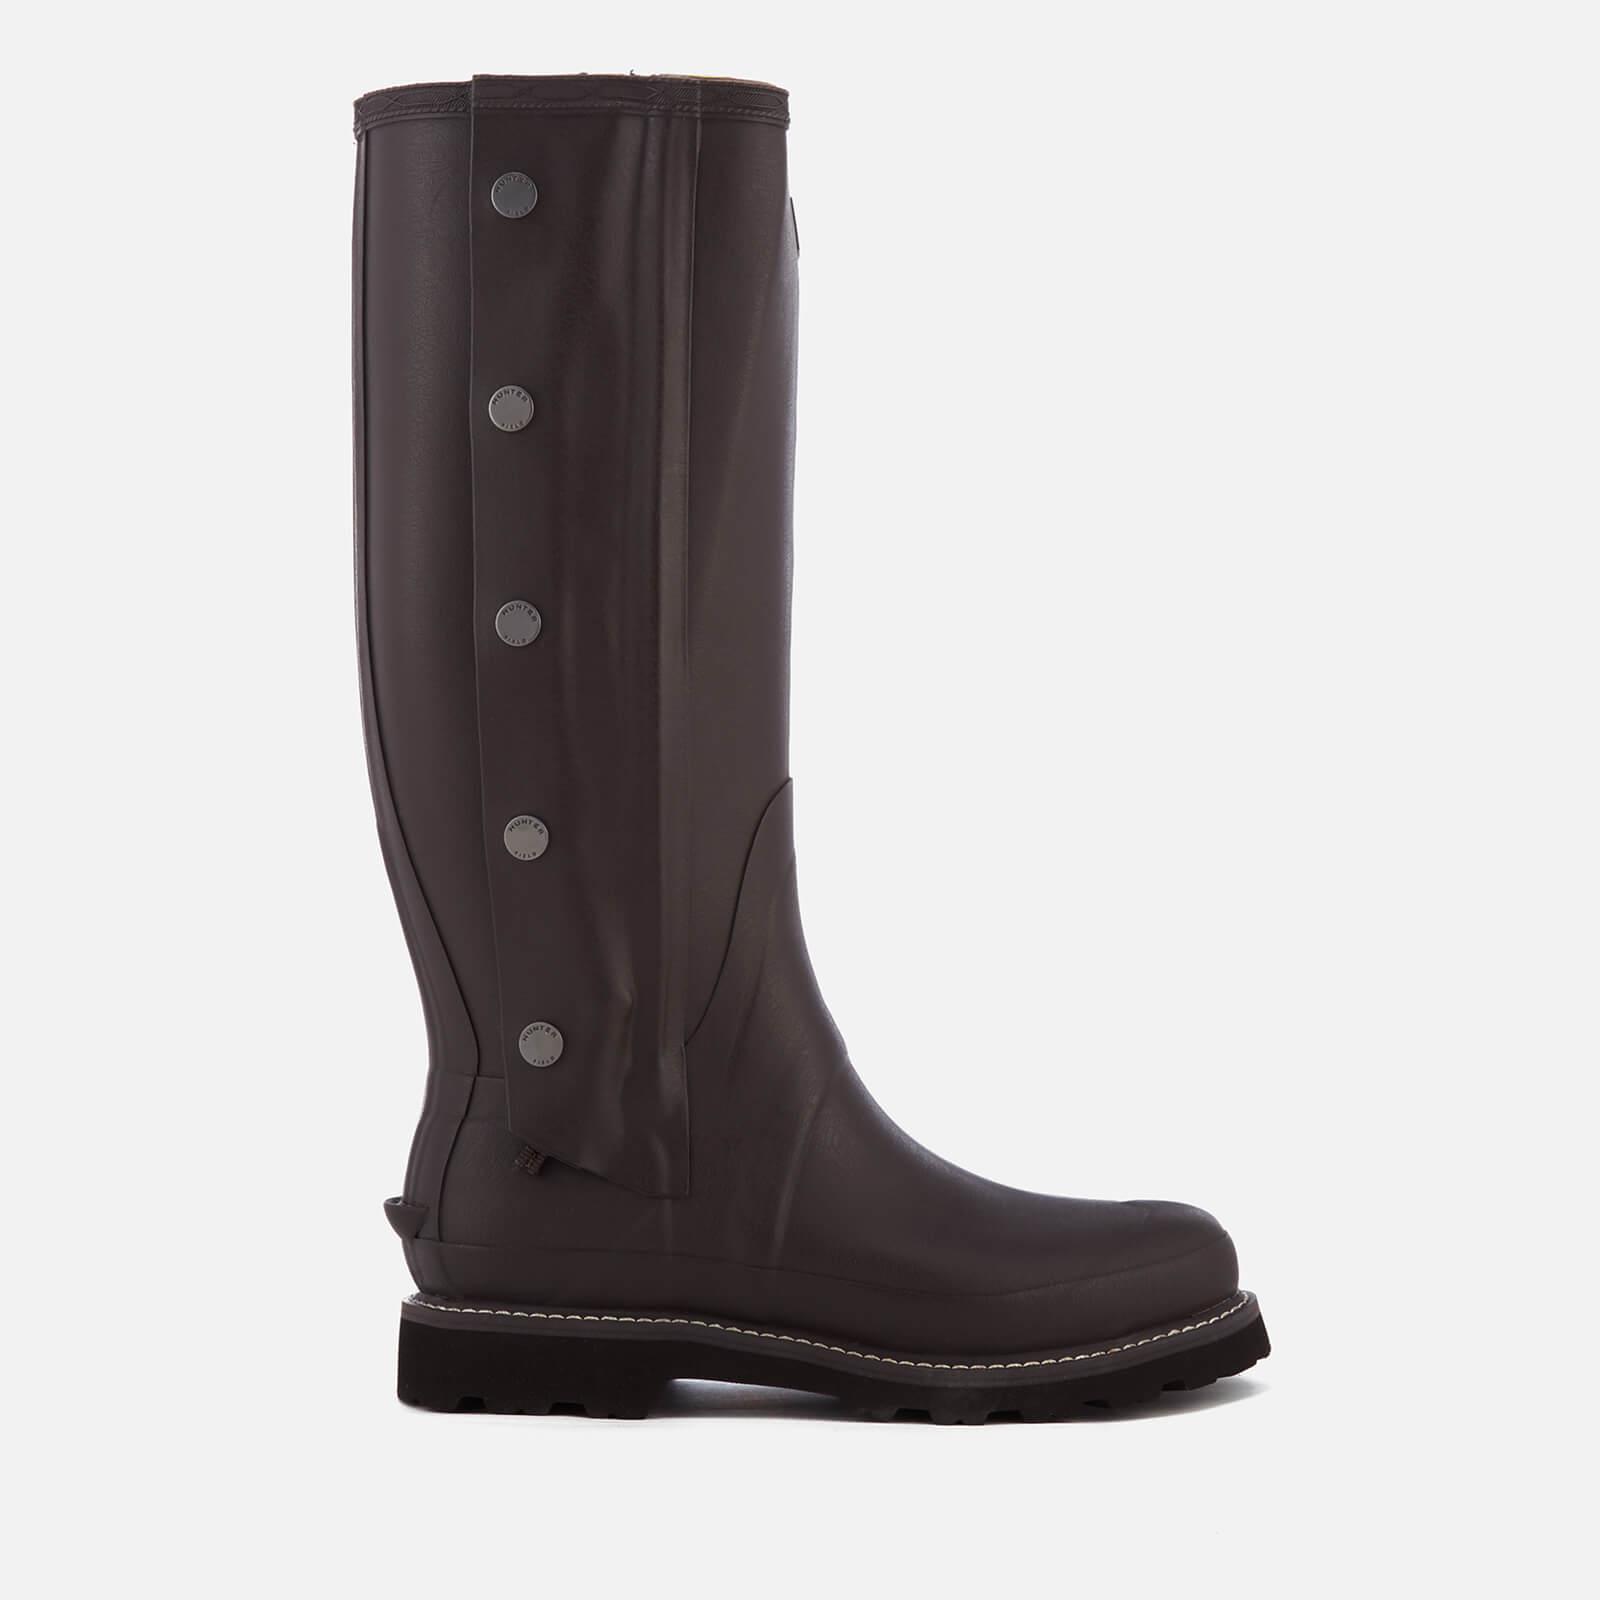 HUNTER Rubber Balmoral Side Zip Wellington Boots in Brown - Lyst